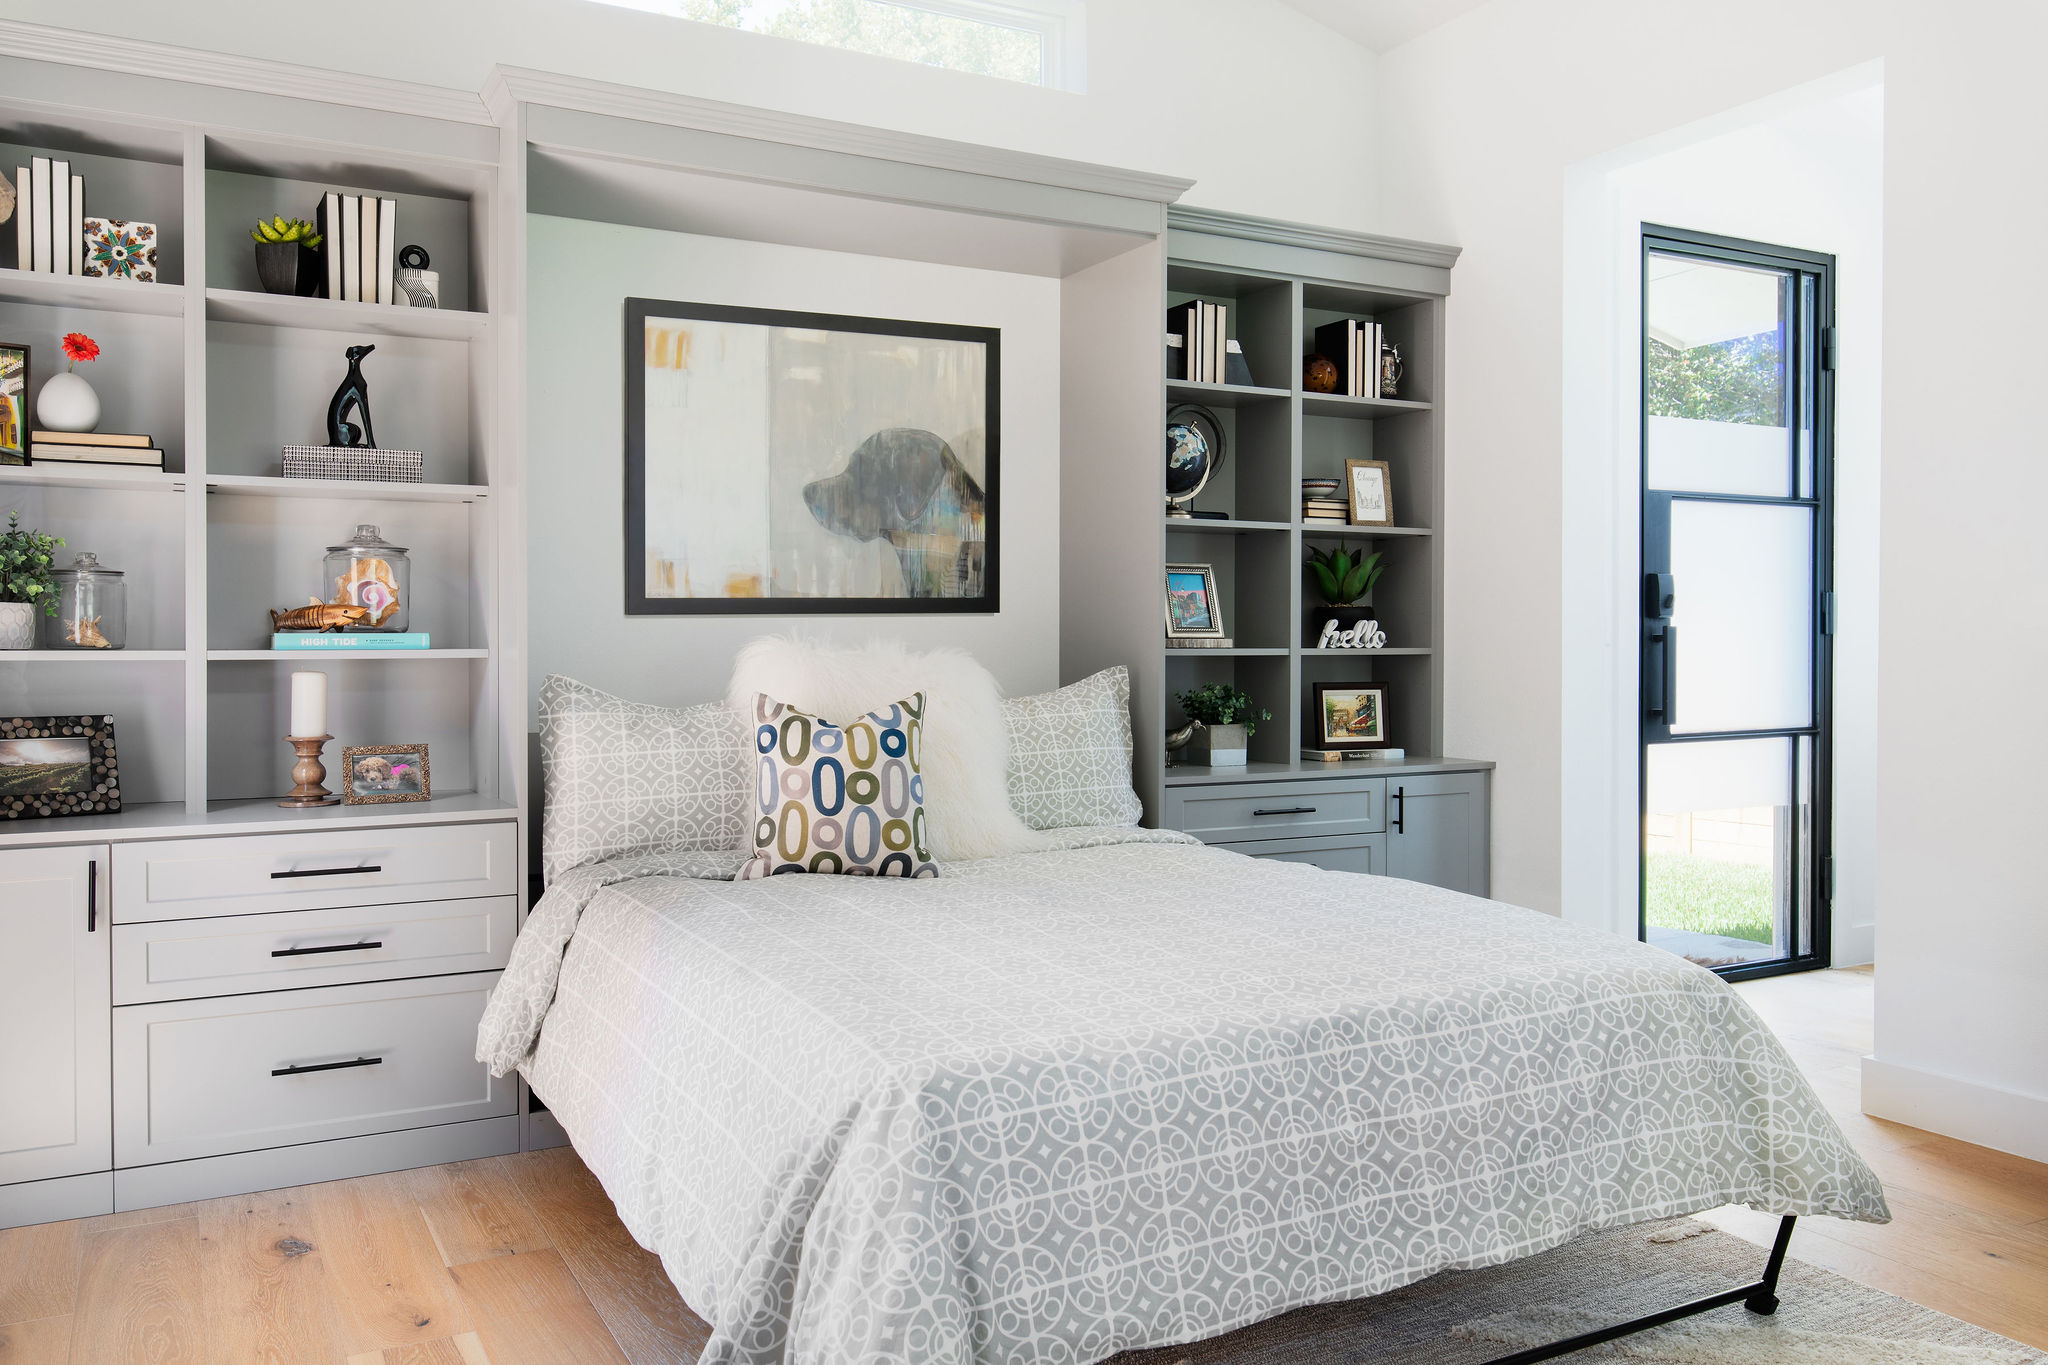 "Maximize space with our Murphy beds. Transform your room effortlessly from day to night, combining functionality and style. Discover versatile solutions for small spaces. Explore our Murphy bed collection now!"